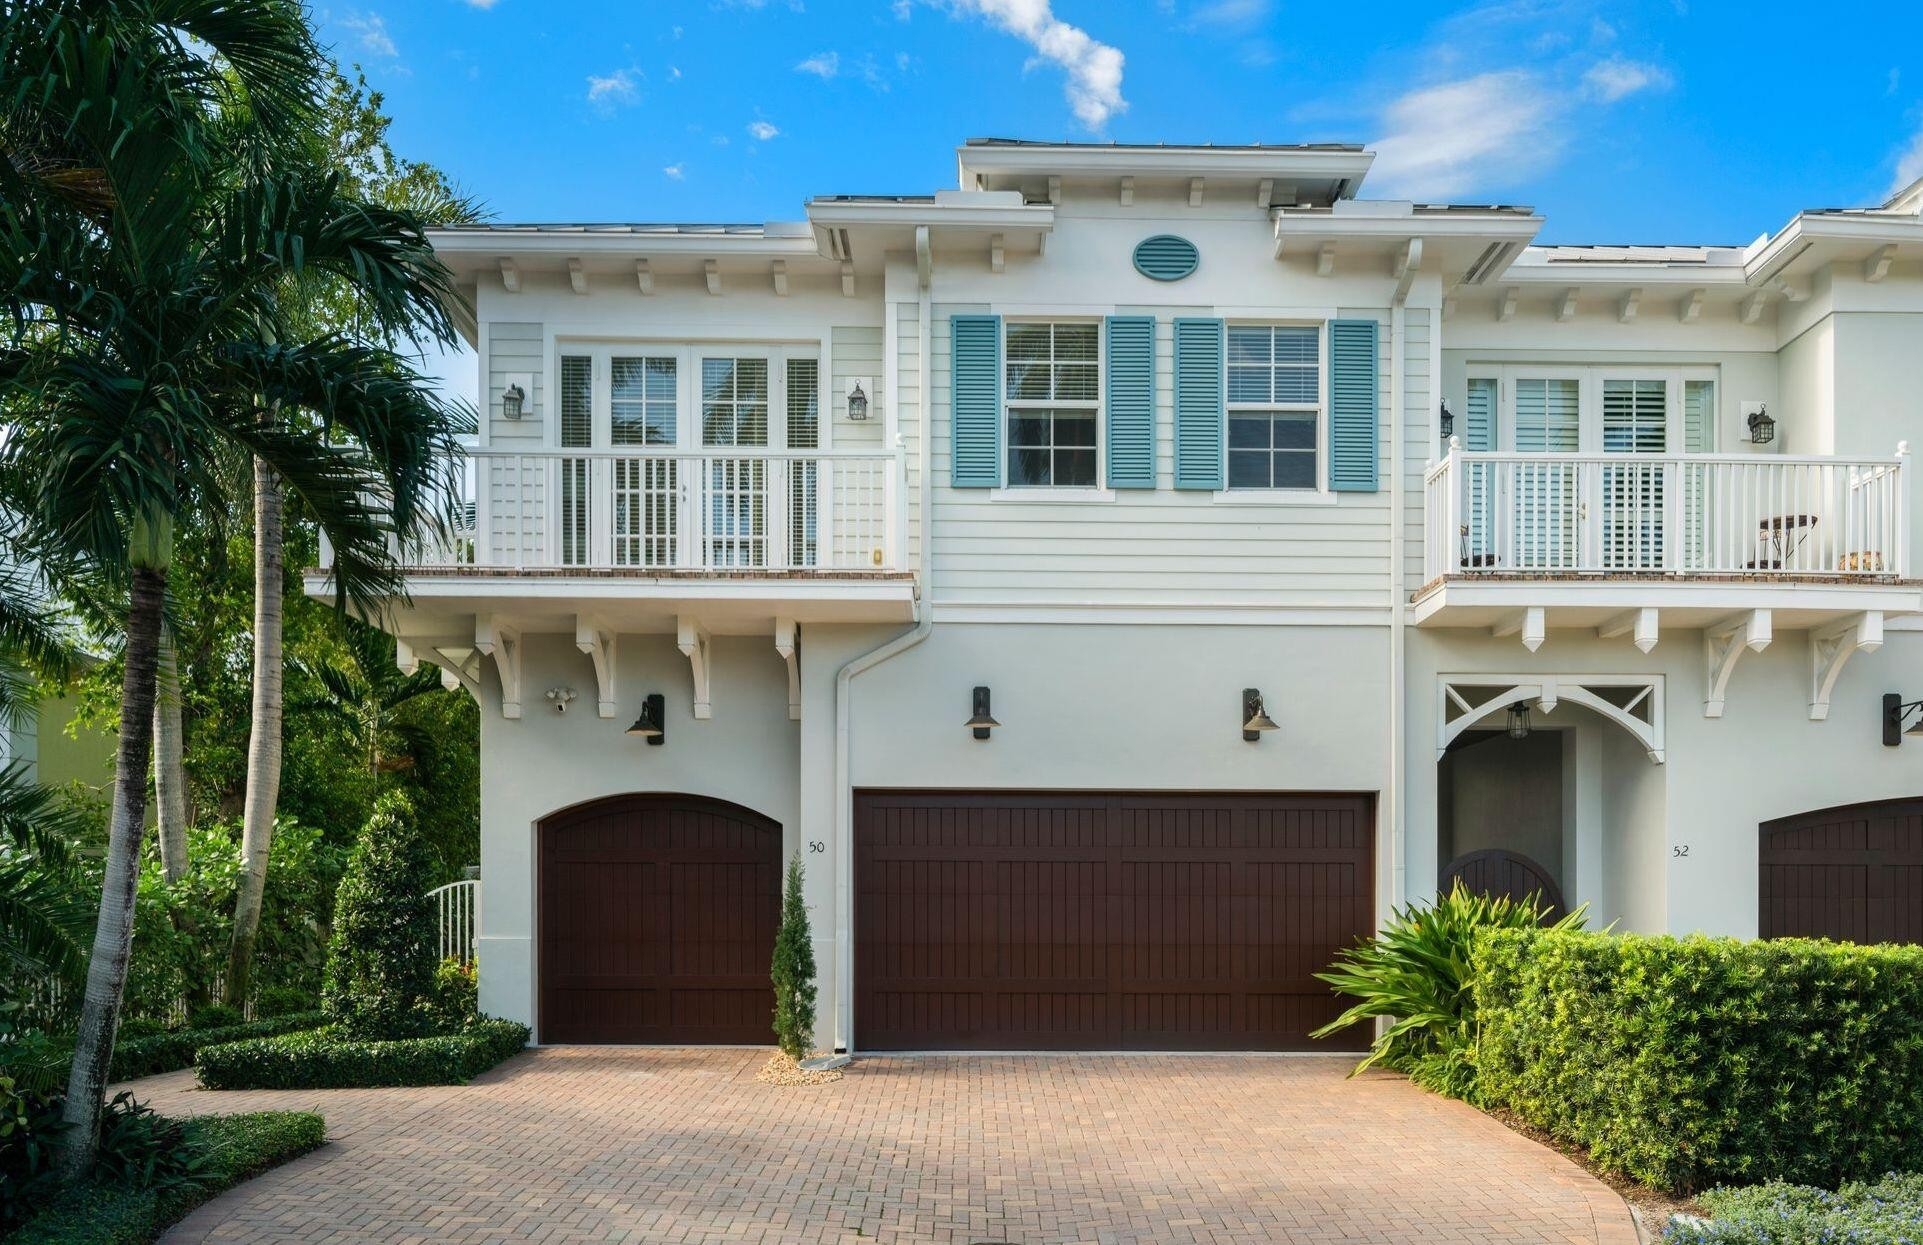 Single Family Townhouse for Sale at Delray Beach Association, Delray Beach, FL 33483